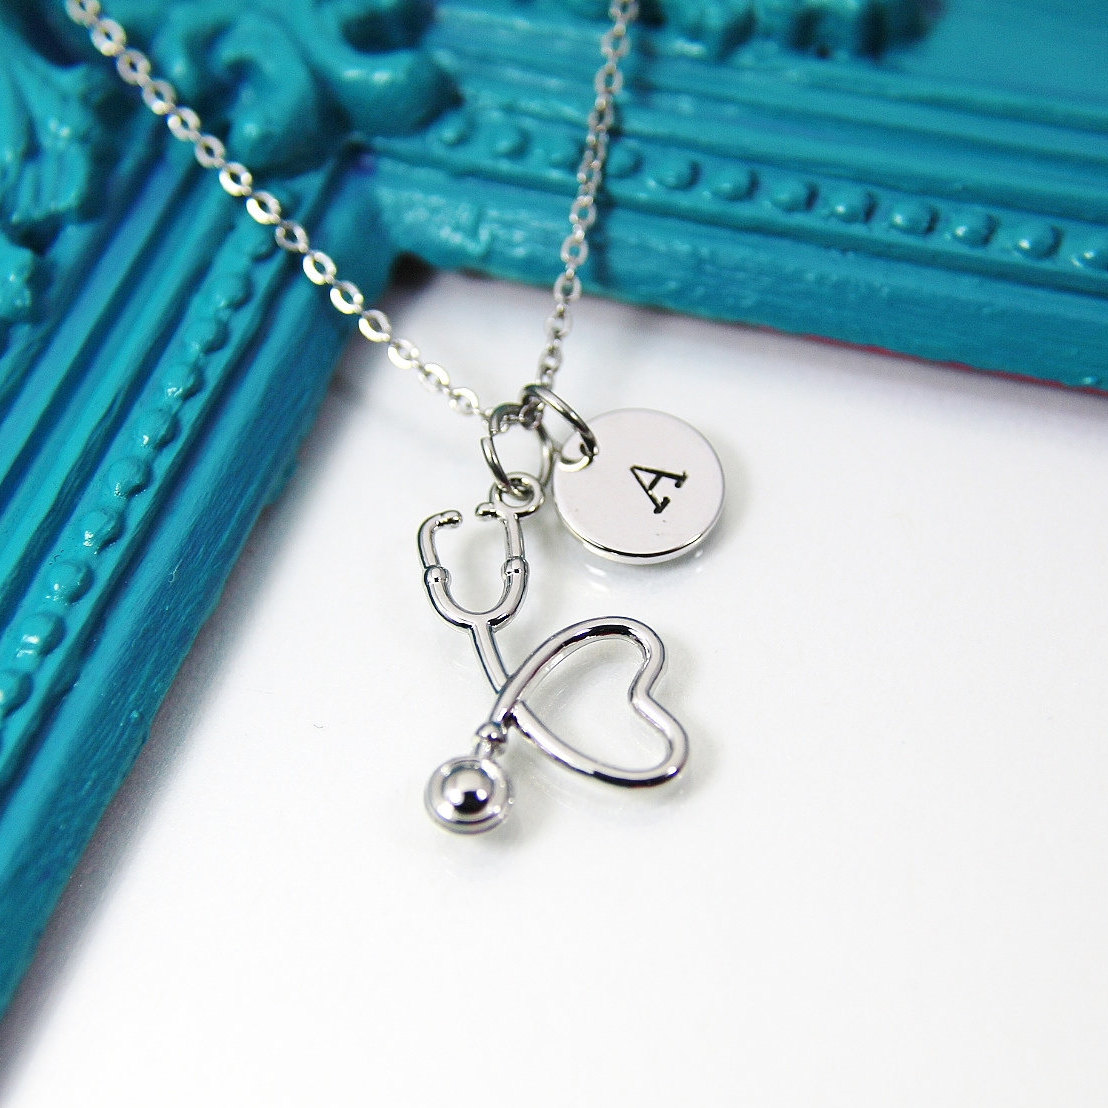 Stethoscope Necklace Silver or Gold Stethoscope Heart